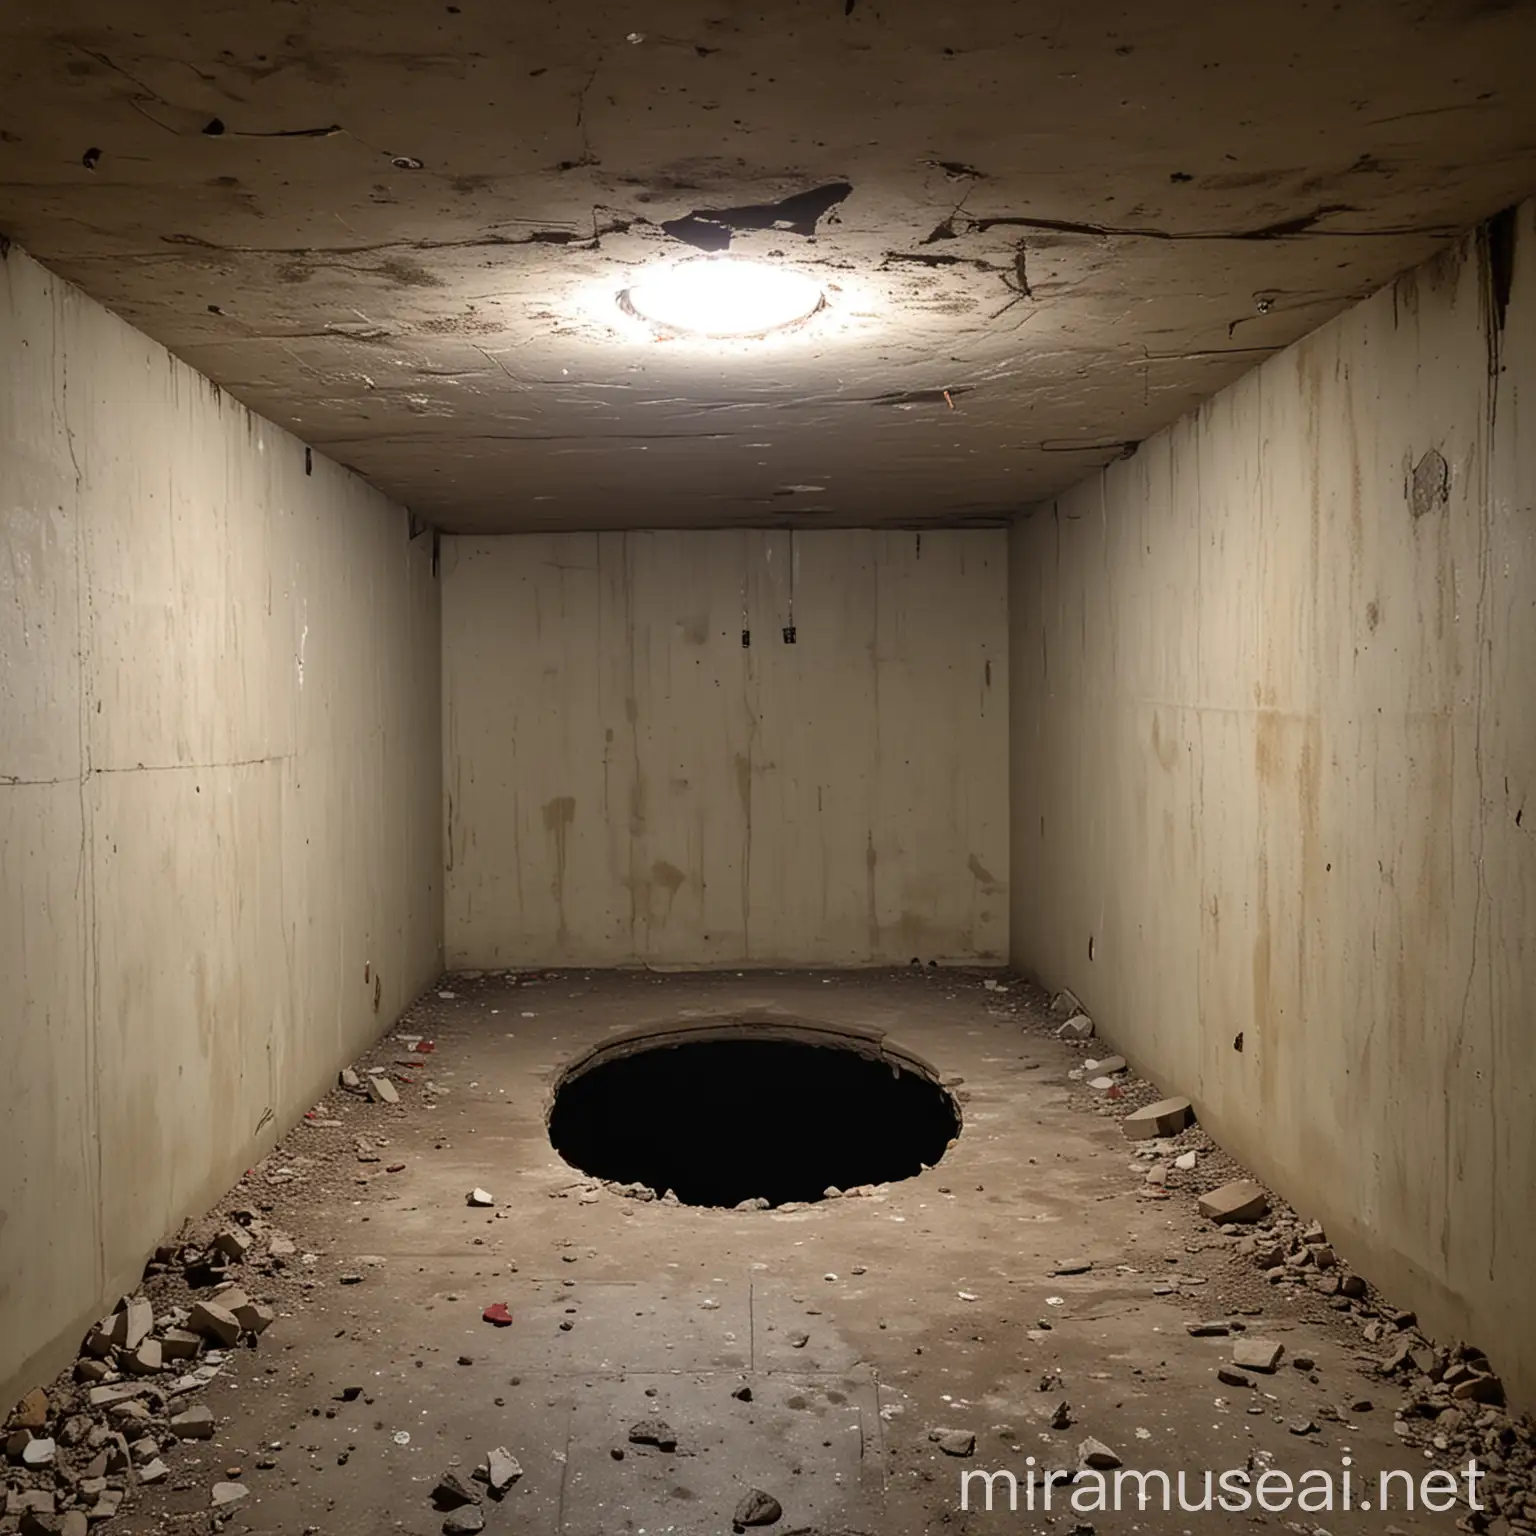 Mysterious Backroom with a Large Hole